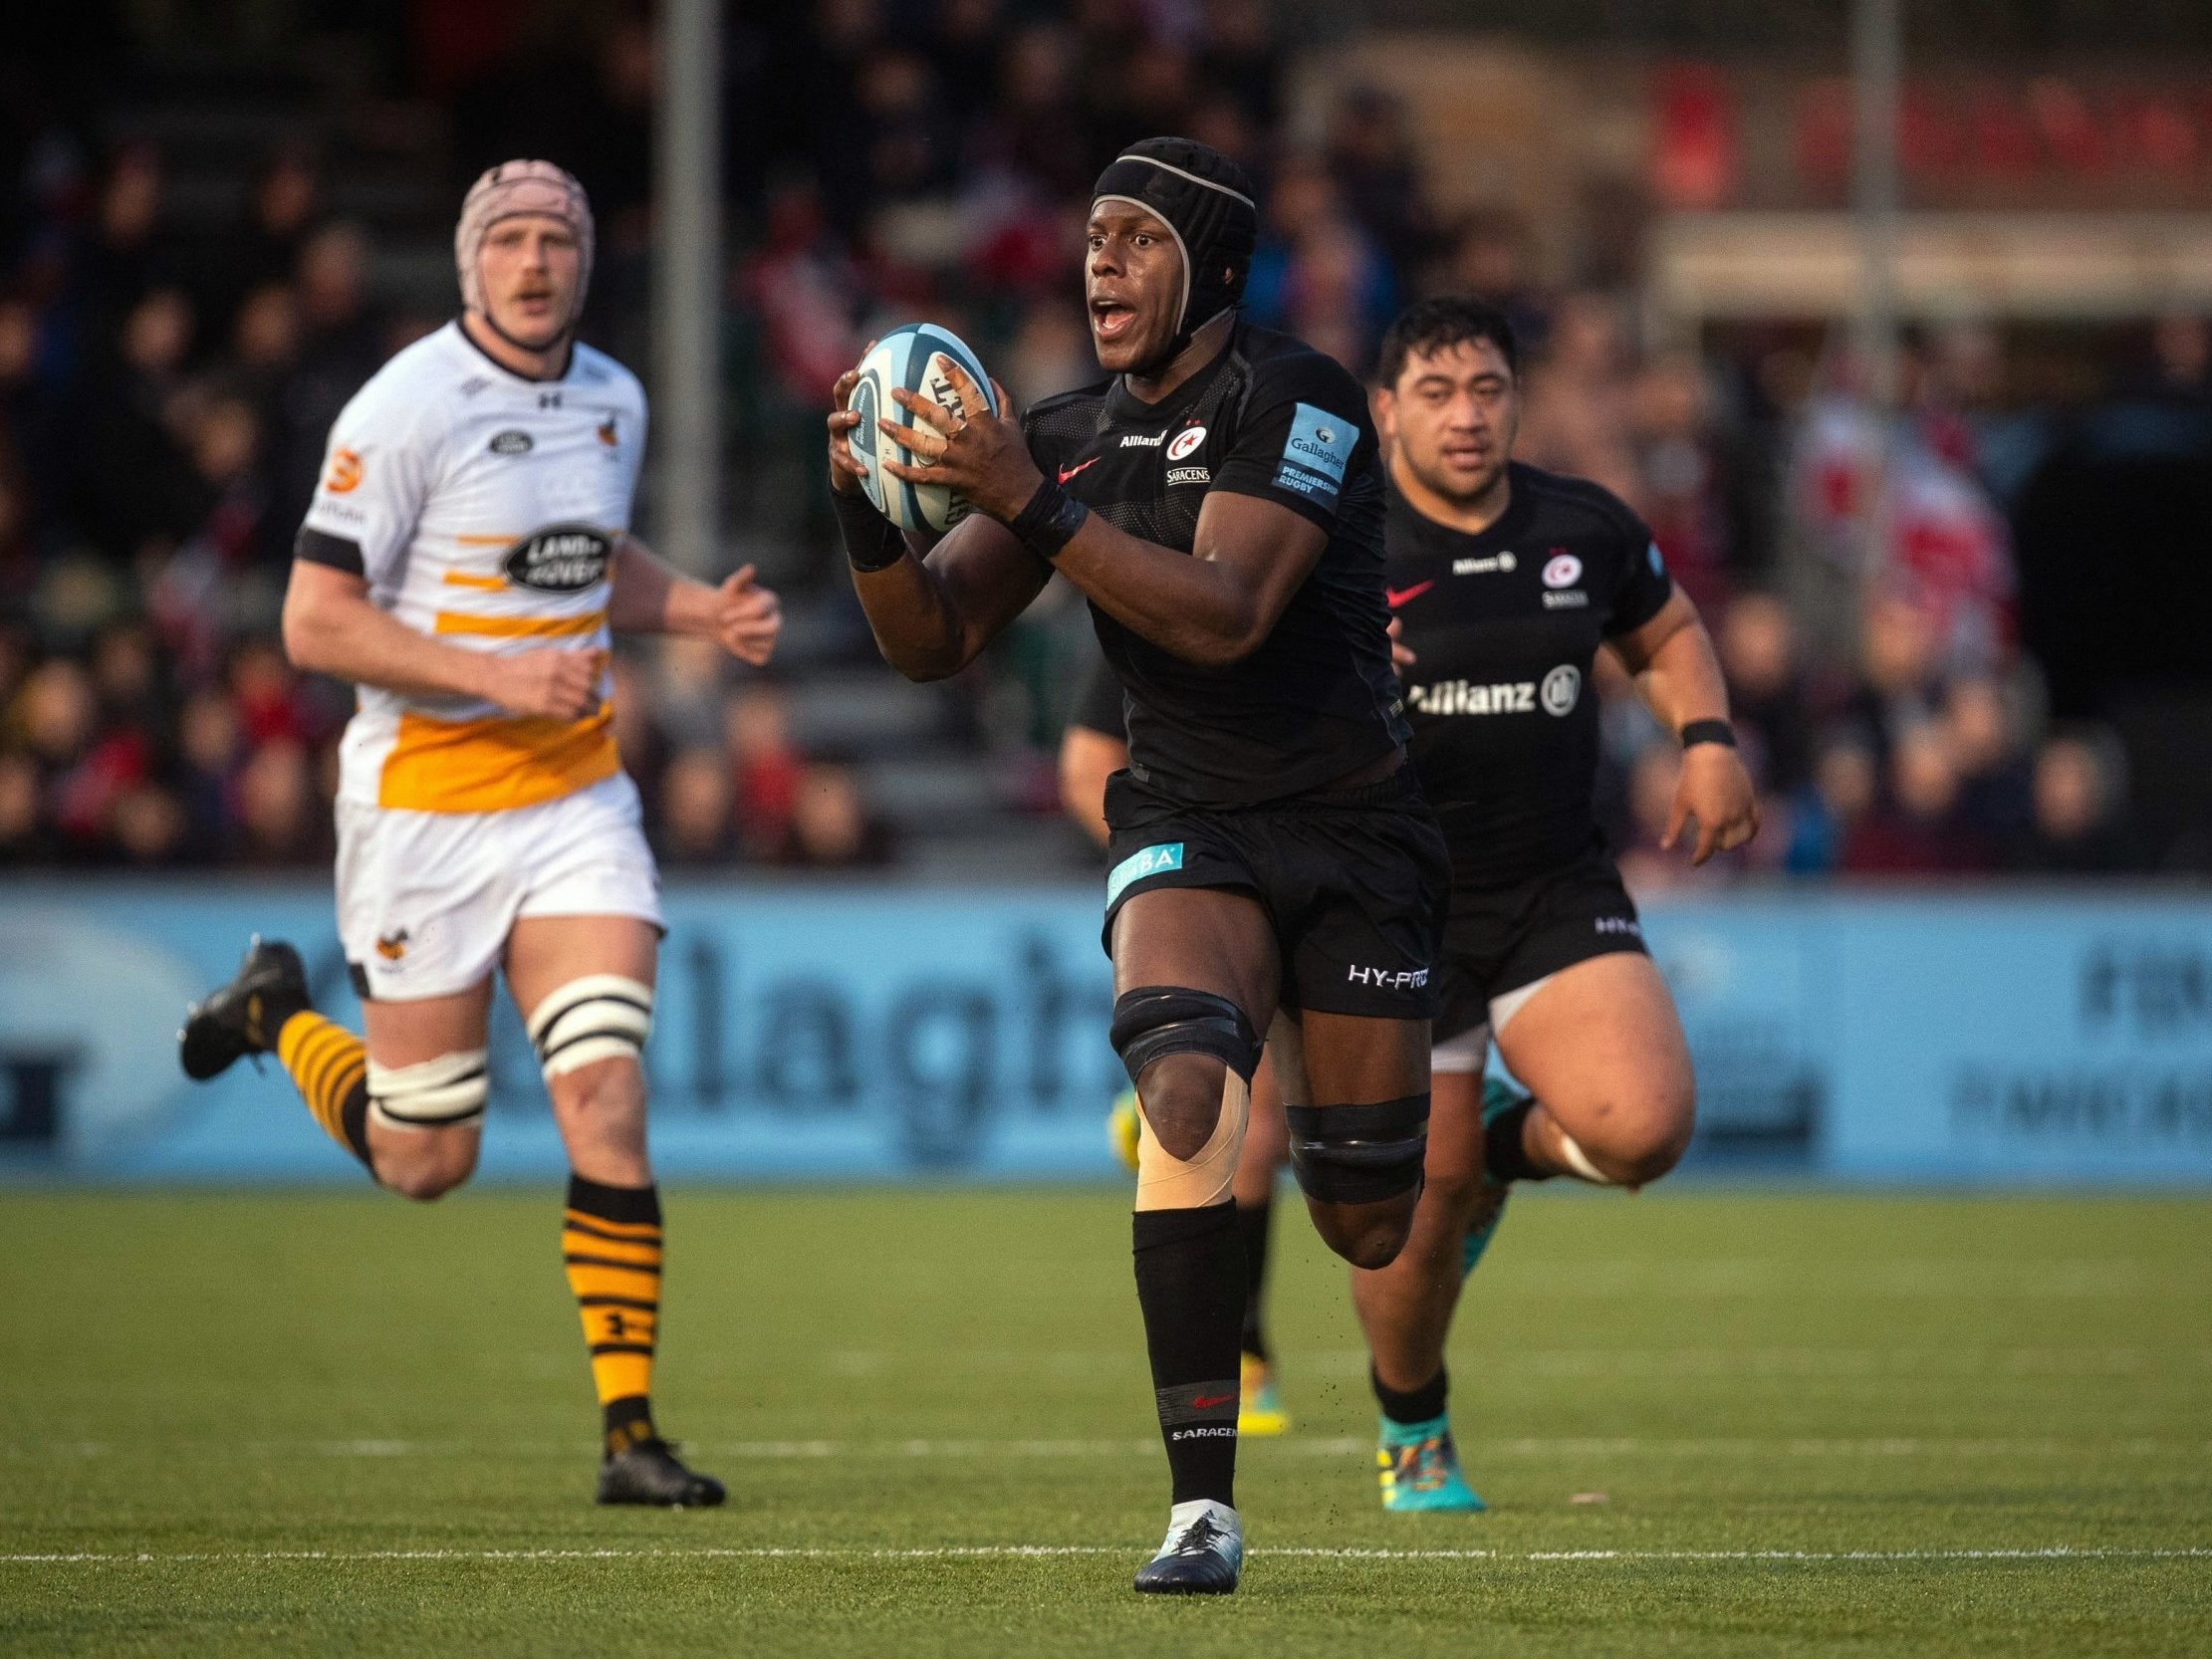 Maro Itoje will miss several weeks after chipping his patella bone in his right knee